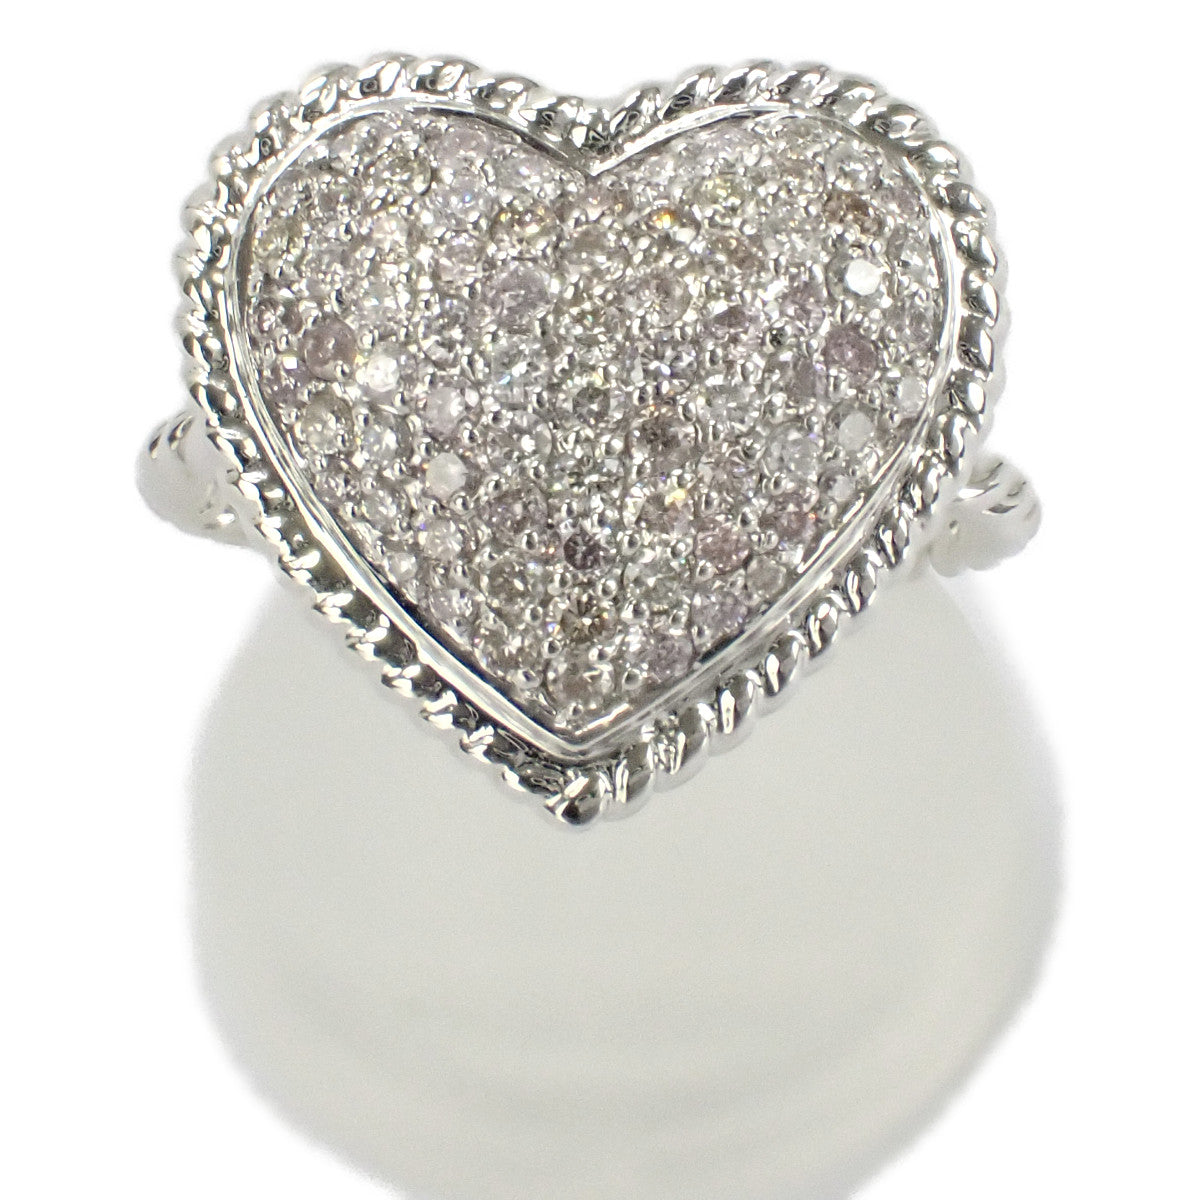 LuxUness  K18 White Gold Heart Shaped Diamond 0.65ct Ring, Women's Silver, Size 13 - 435016 in Excellent condition